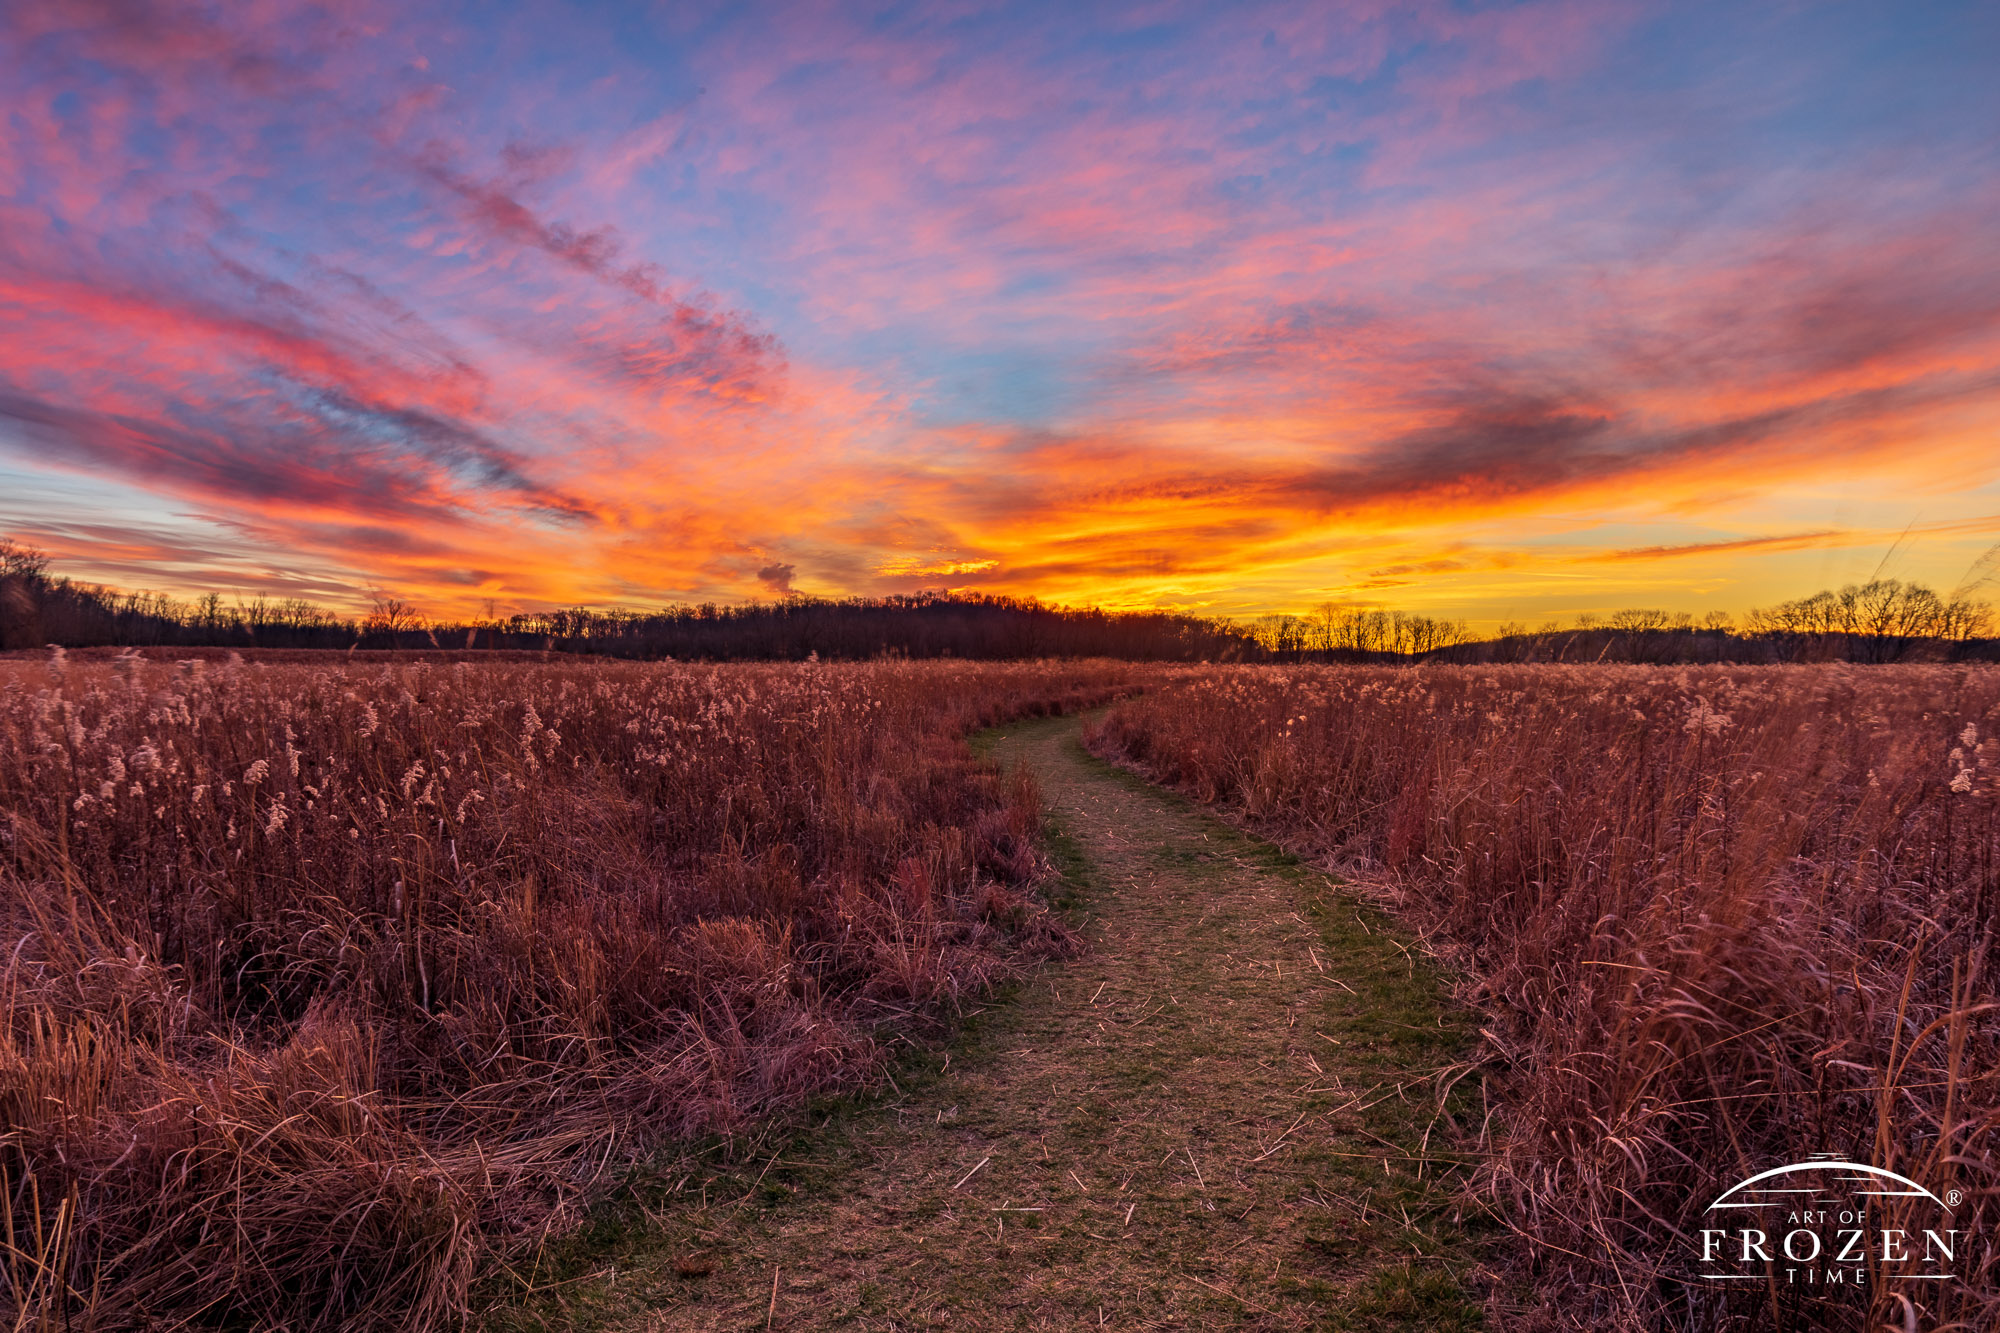 A meandering trail leads the viewer through an Ohio tall-grass prairie towards a colorful sunset on a late fall evening